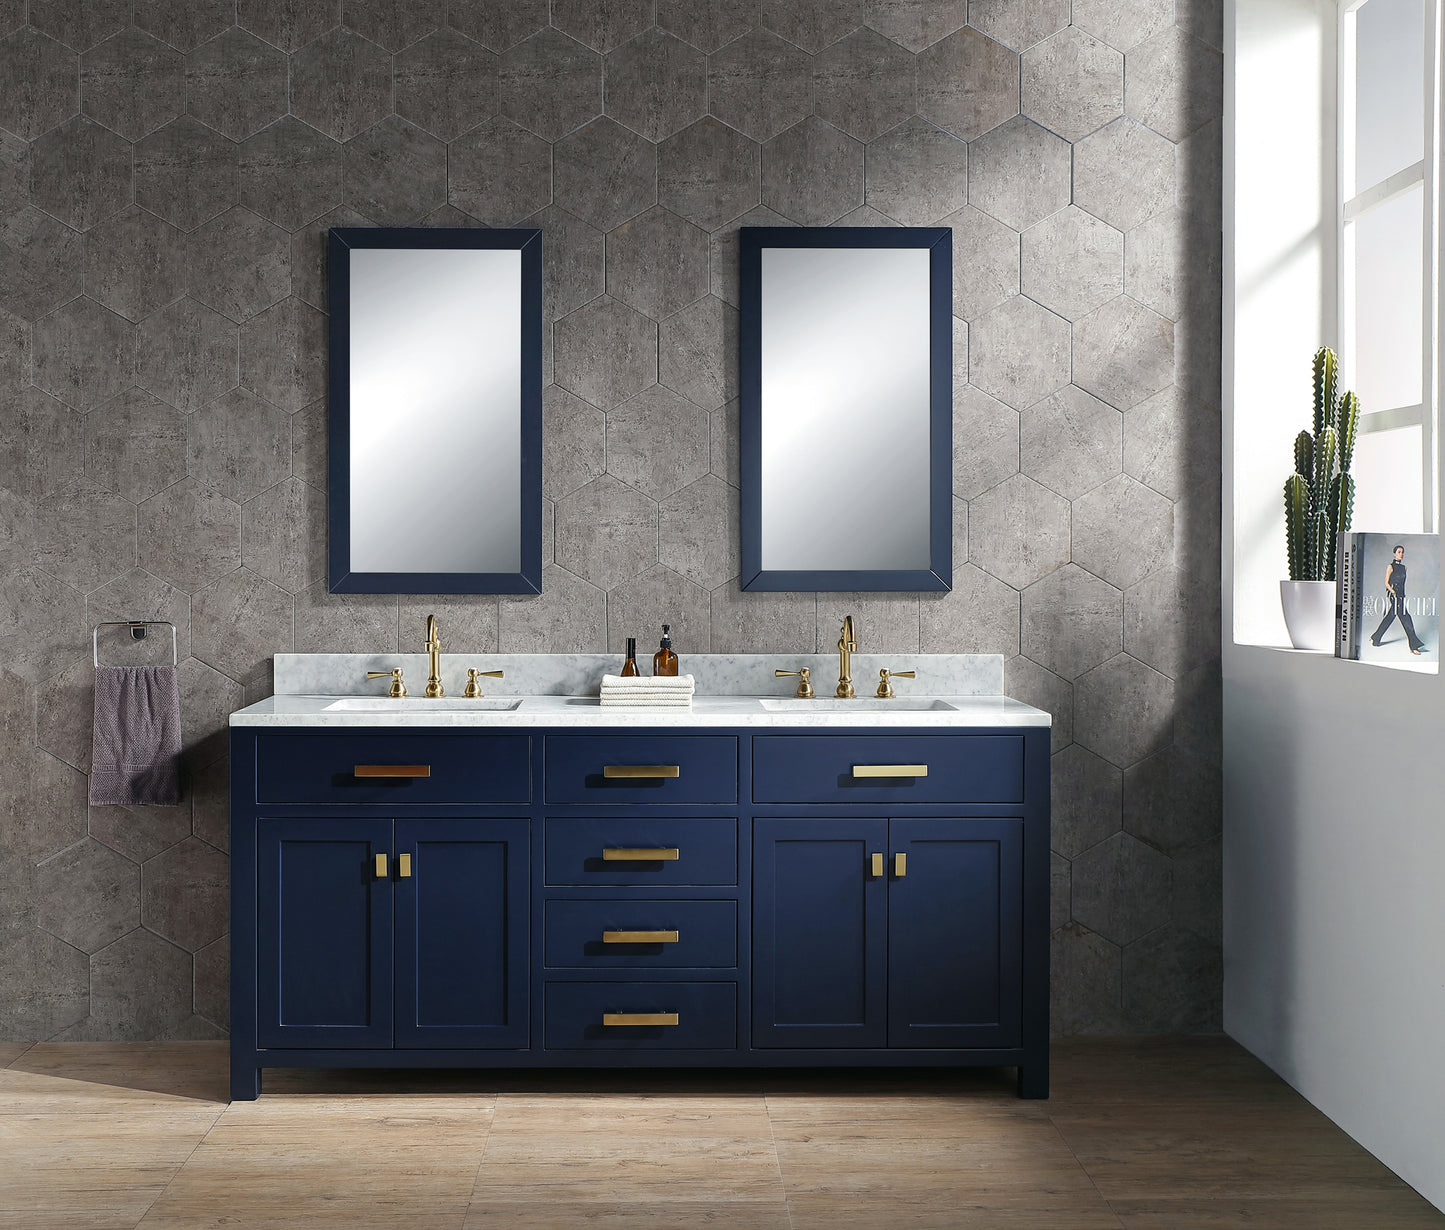 Water Creation Madison 72" Inch Double Sink Carrara White Marble Vanity In Monarch Blue with Matching Mirror and Lavatory Faucet - Luxe Bathroom Vanities